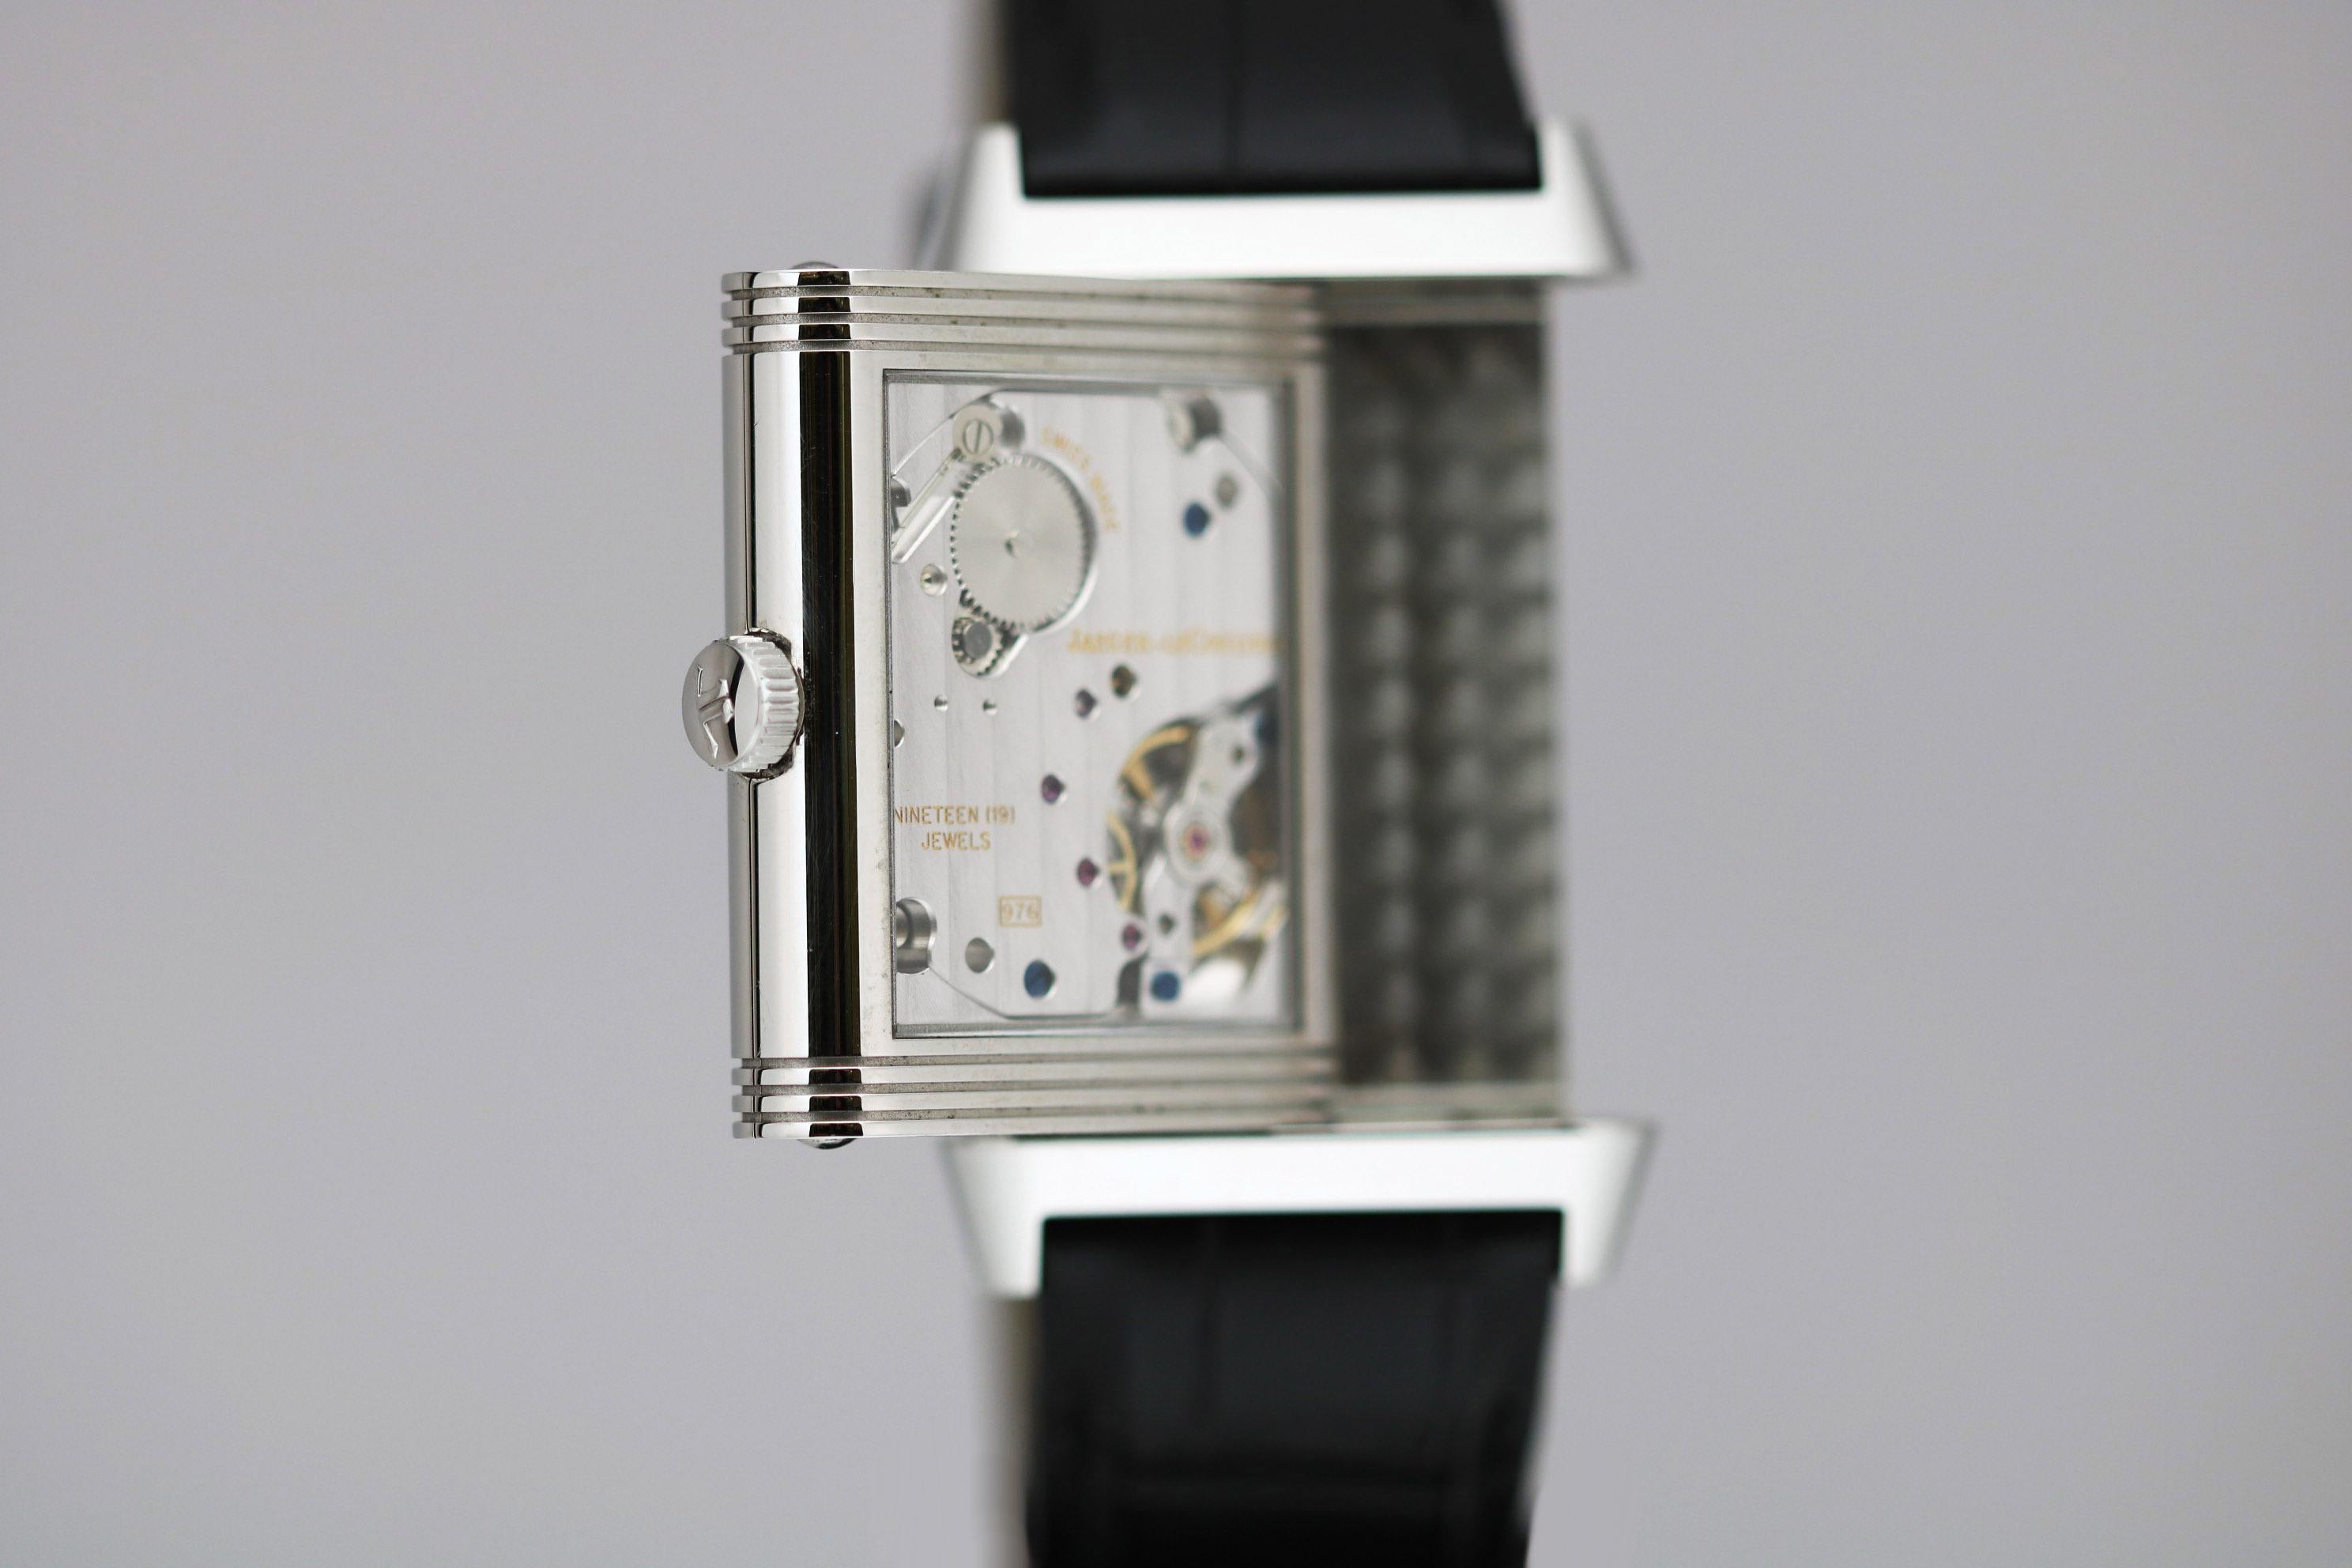 Jaeger Le-Coultre (Jaeger-LeCoultre) Grand Reverso 976  over-sized rectangle case with exhibition back on reverse side with a black strap and deployant clasp. Comes with box and papers.